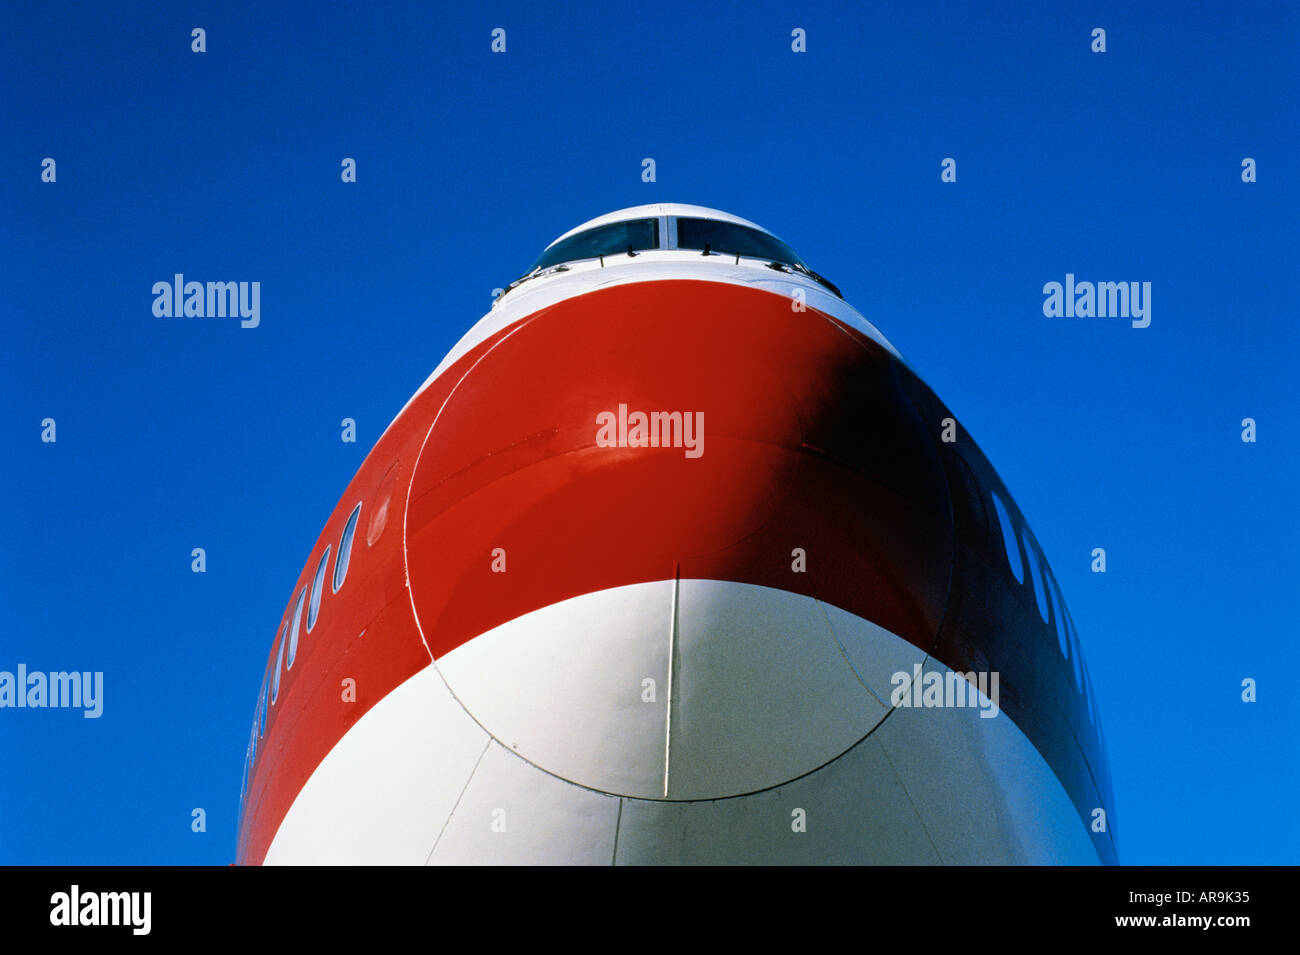 Boeing 747 jumbo jet nose red and white daylight blue sky Stock Photo